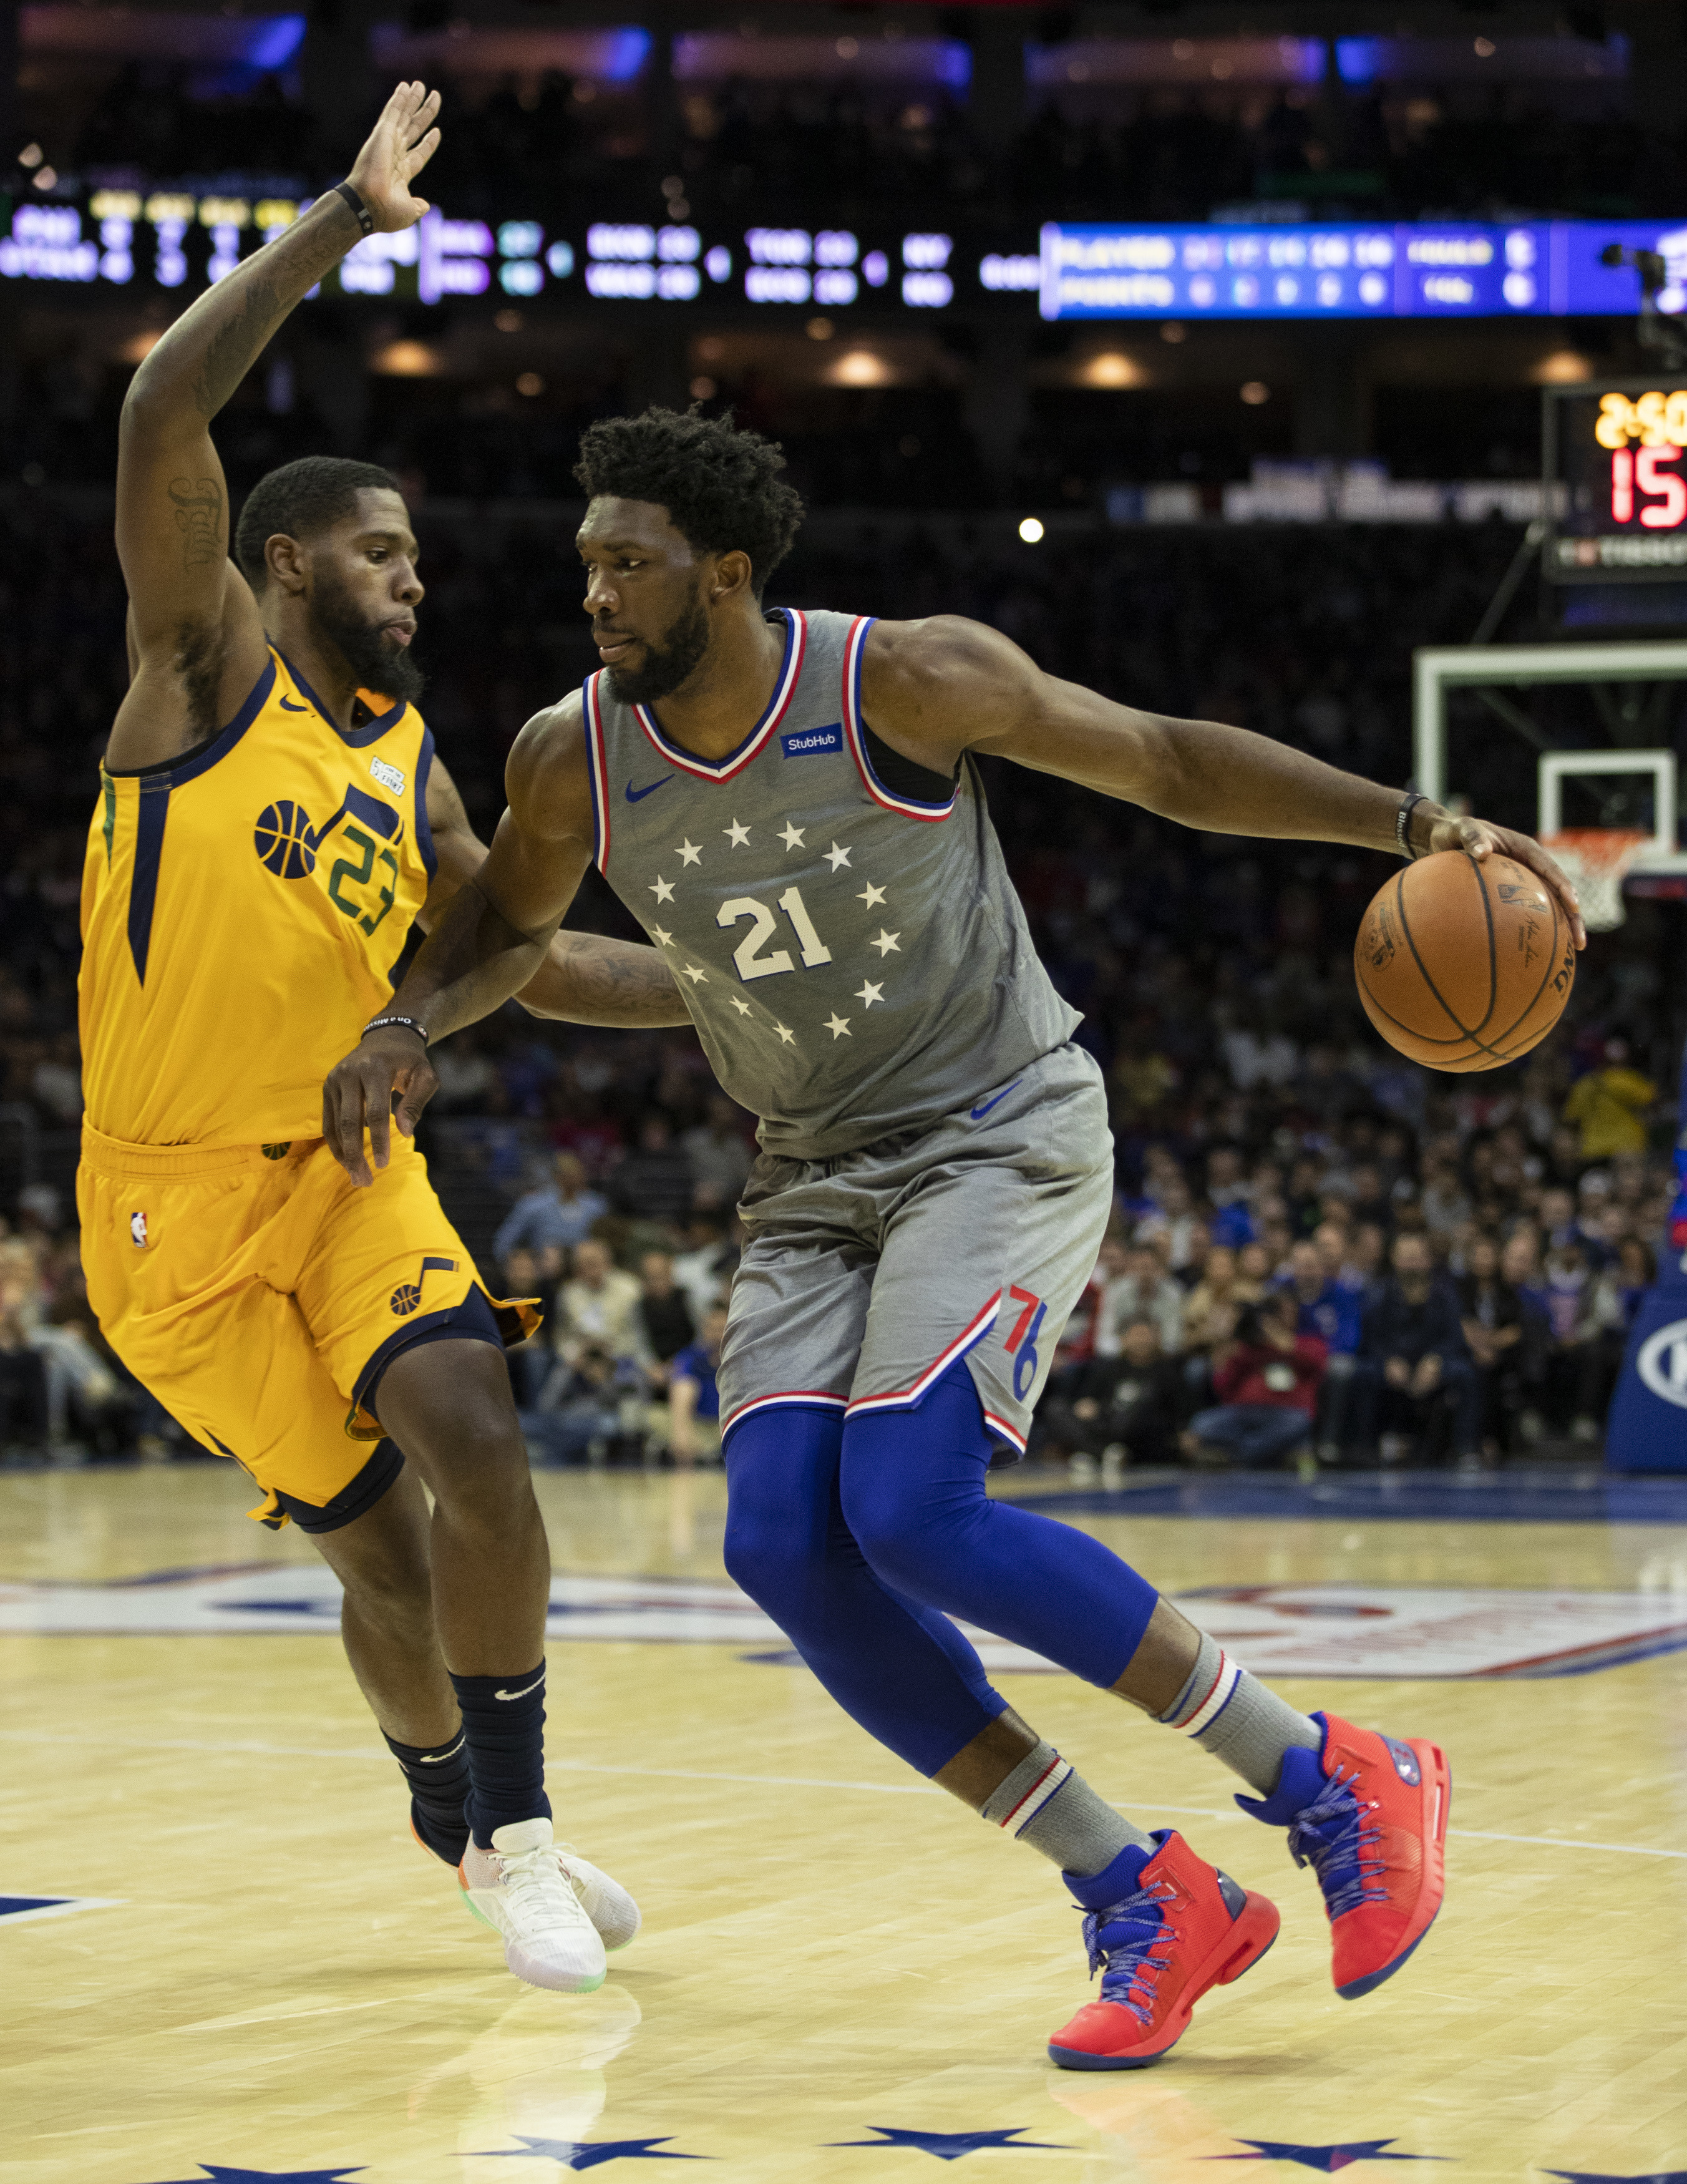 Butler, Embiid lead Sixers past Jazz 113-107